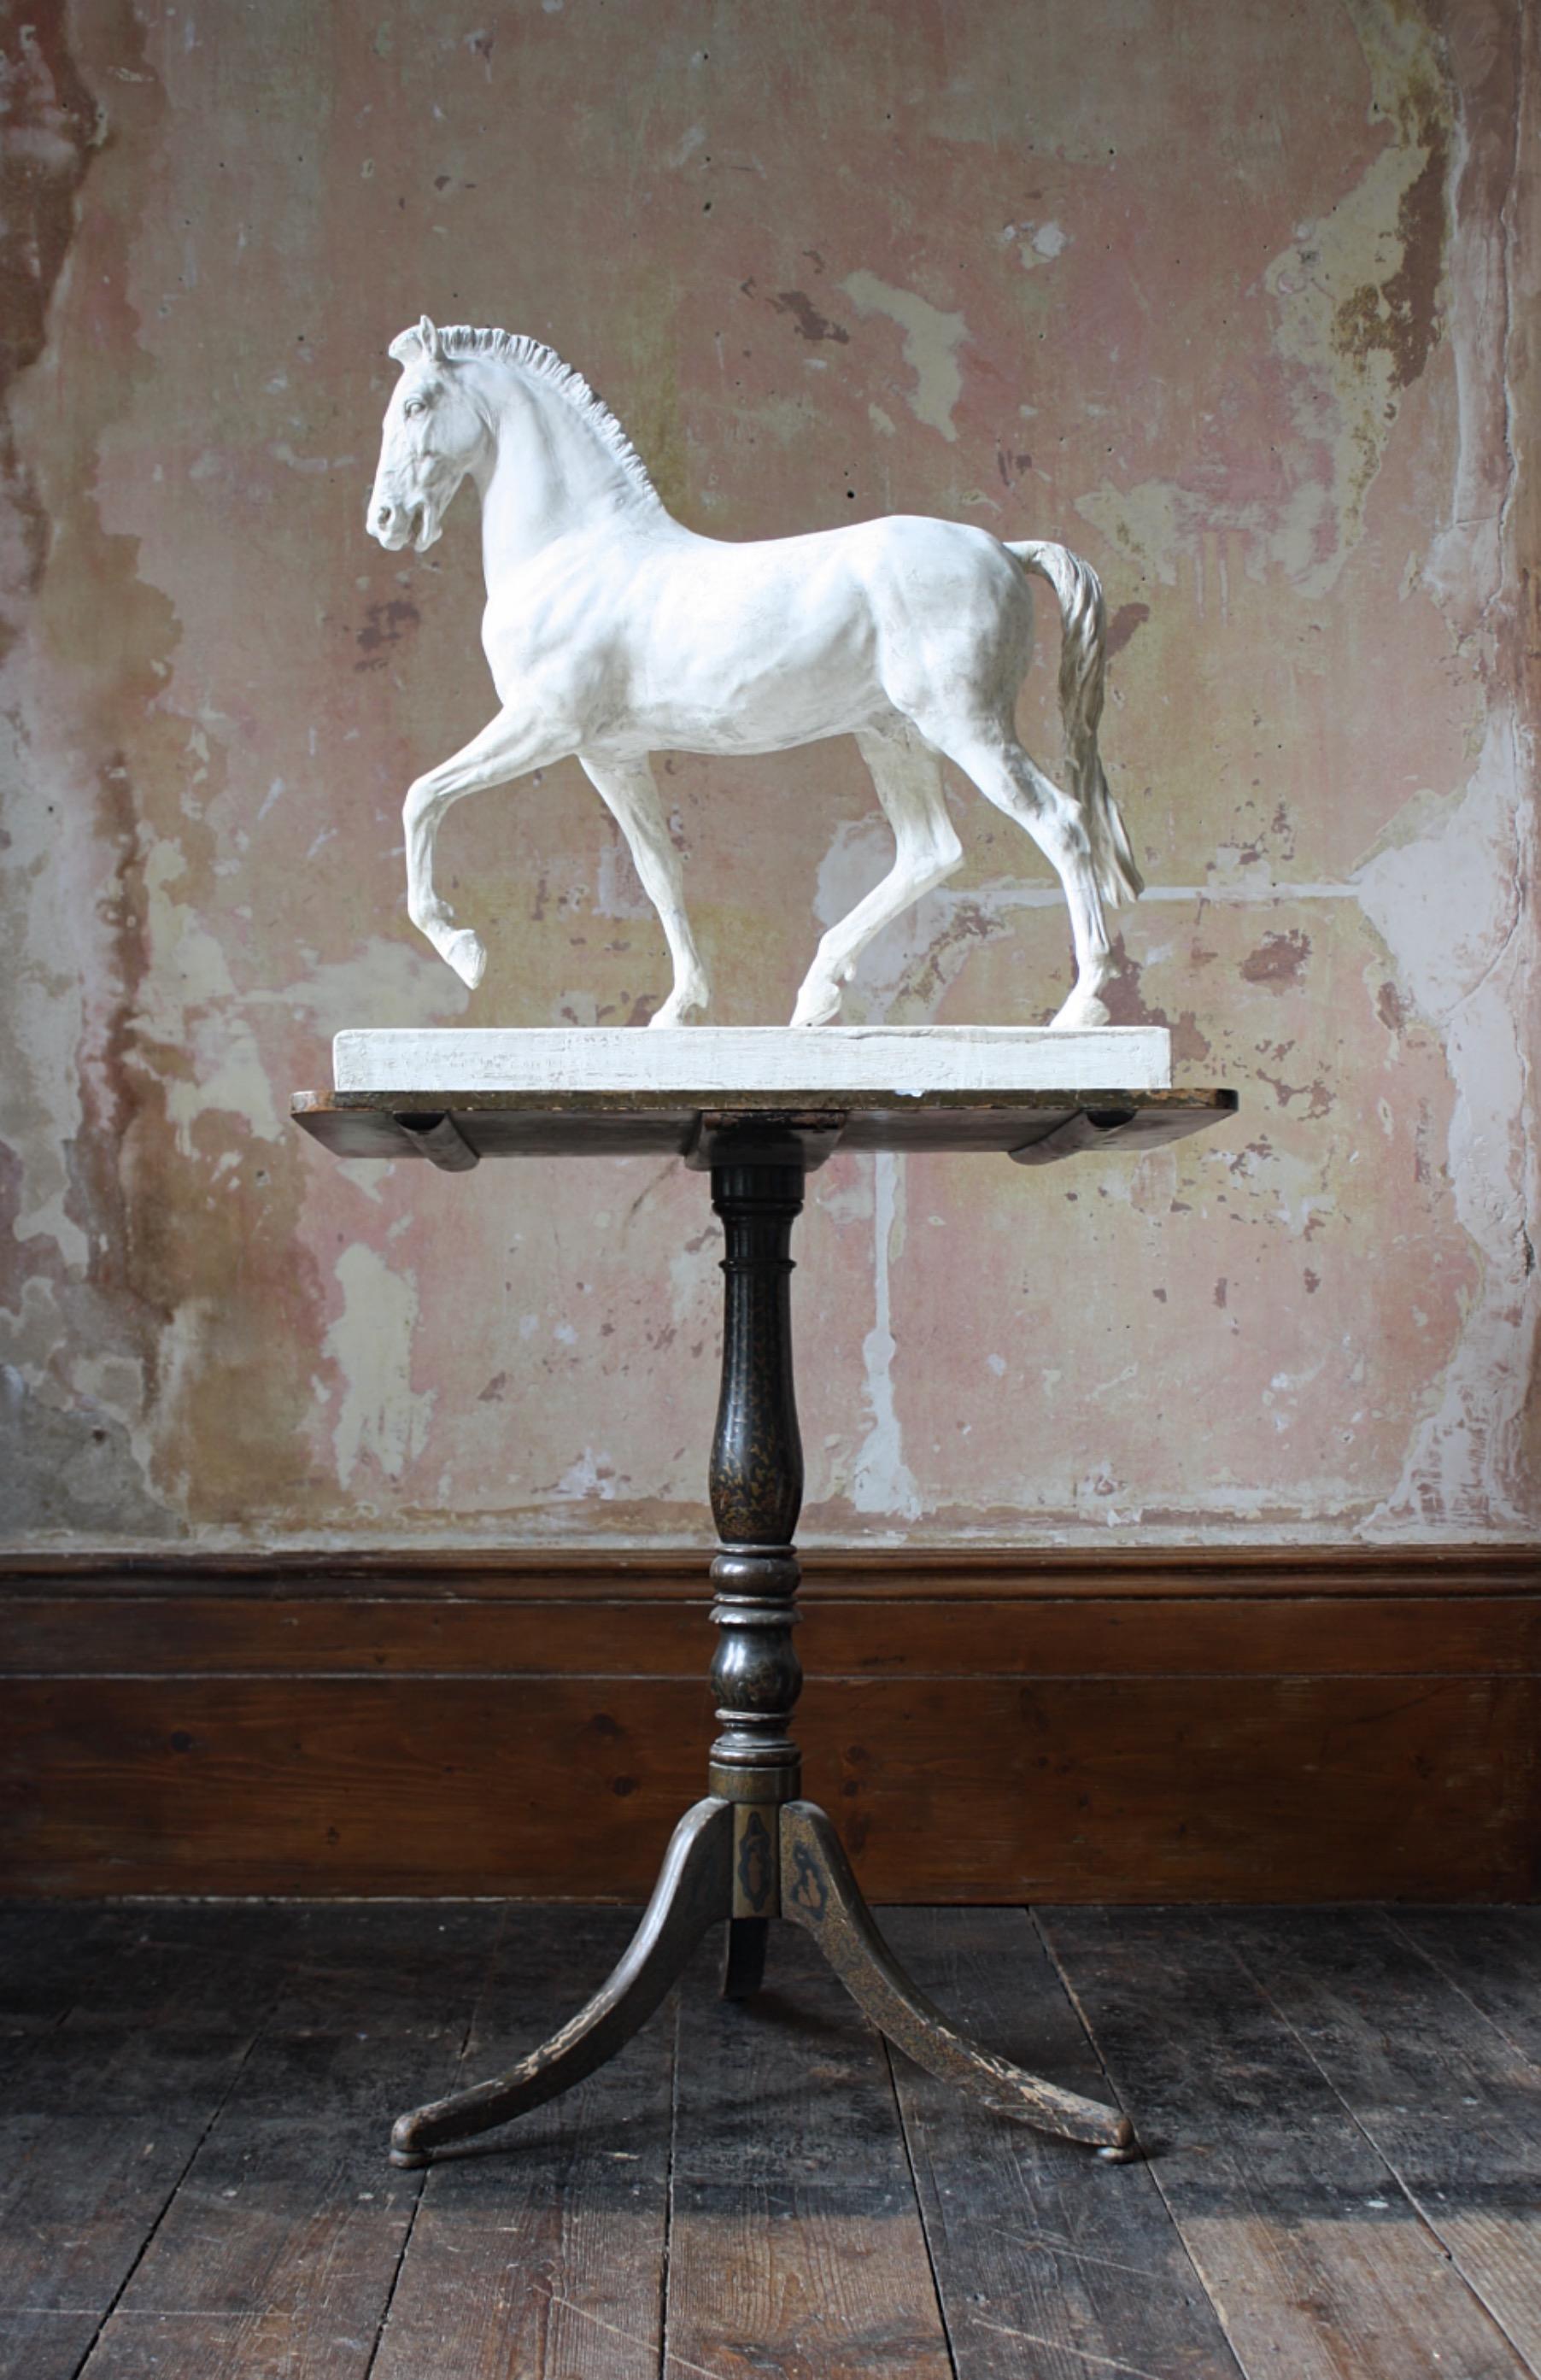 A particularly pleasing and gracefully executed sculpture on a prancing horse, taken from the famous statues of St marks Basilica, Venice.

Late 19th century in age, Italian in origins

Produced in plaster over a metal maquette mounted on a pine